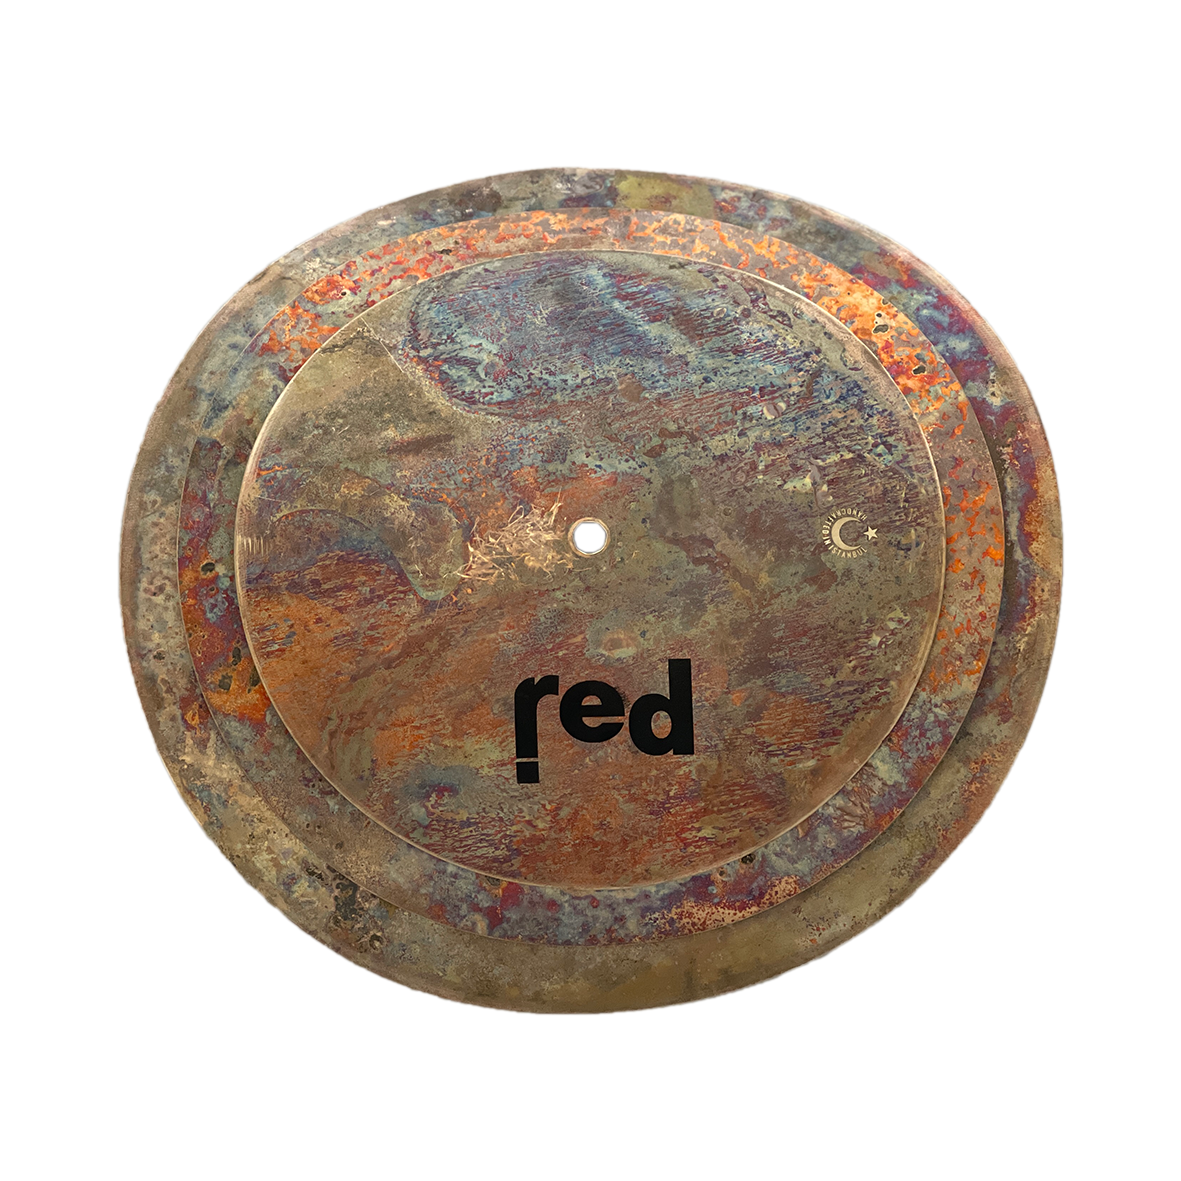 Red Cymbals 'Raw' Series 888 Stack